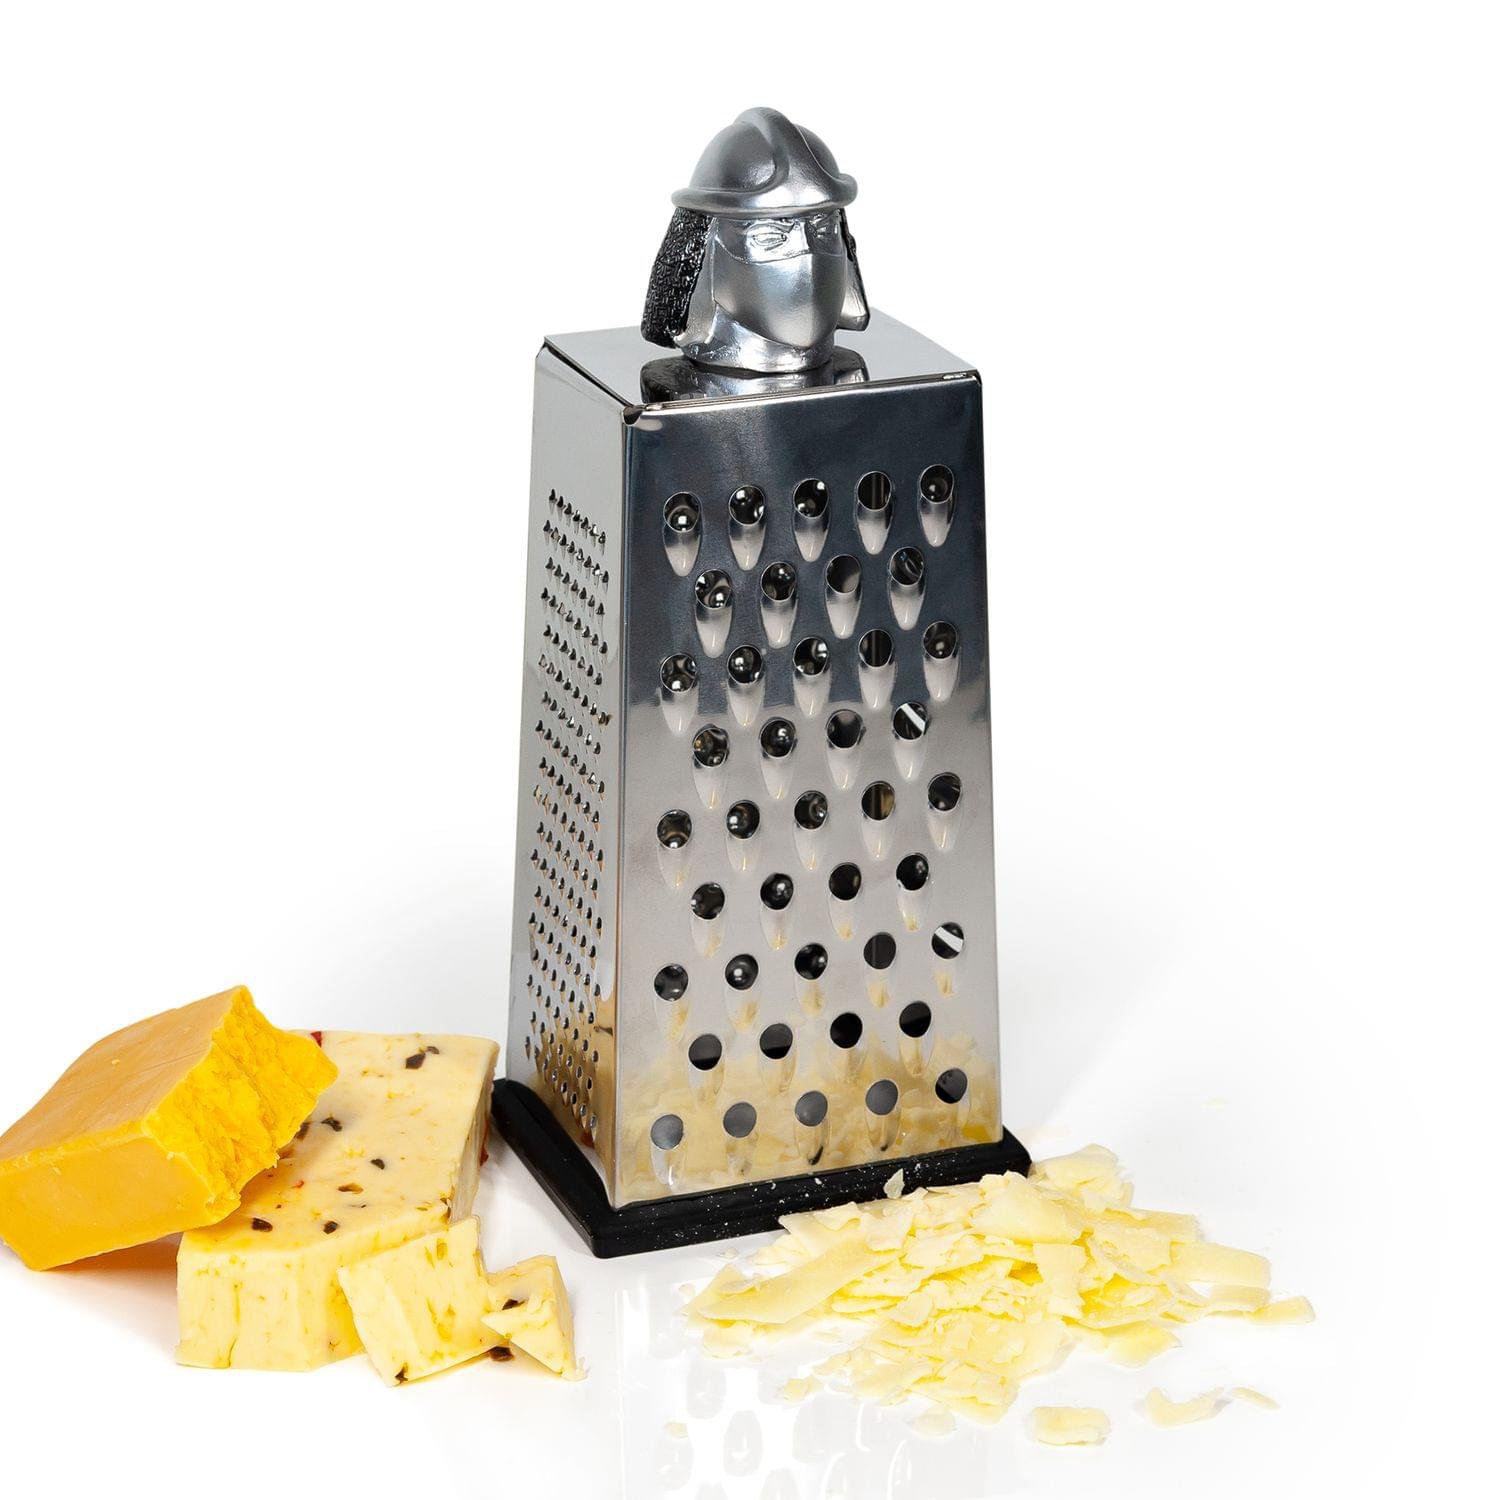 Stainless Steel Cheese Grater Wooden Shredder Cheese Grater Case